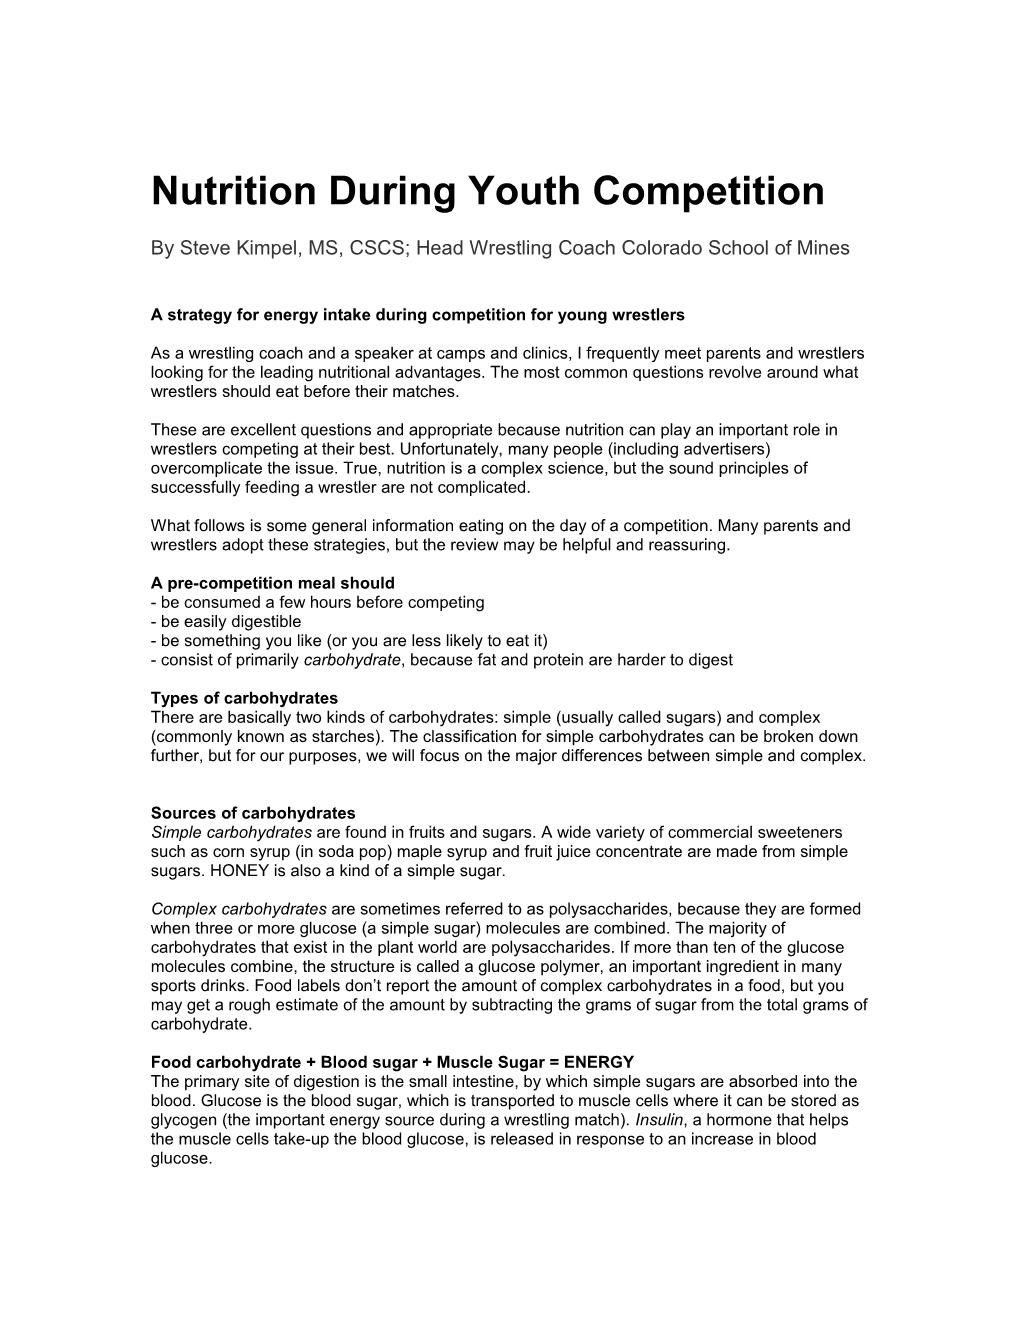 Nutrition During Youth Competition by Steve Kimpel, MS, CSCS; Head Wrestling Coach Colorado